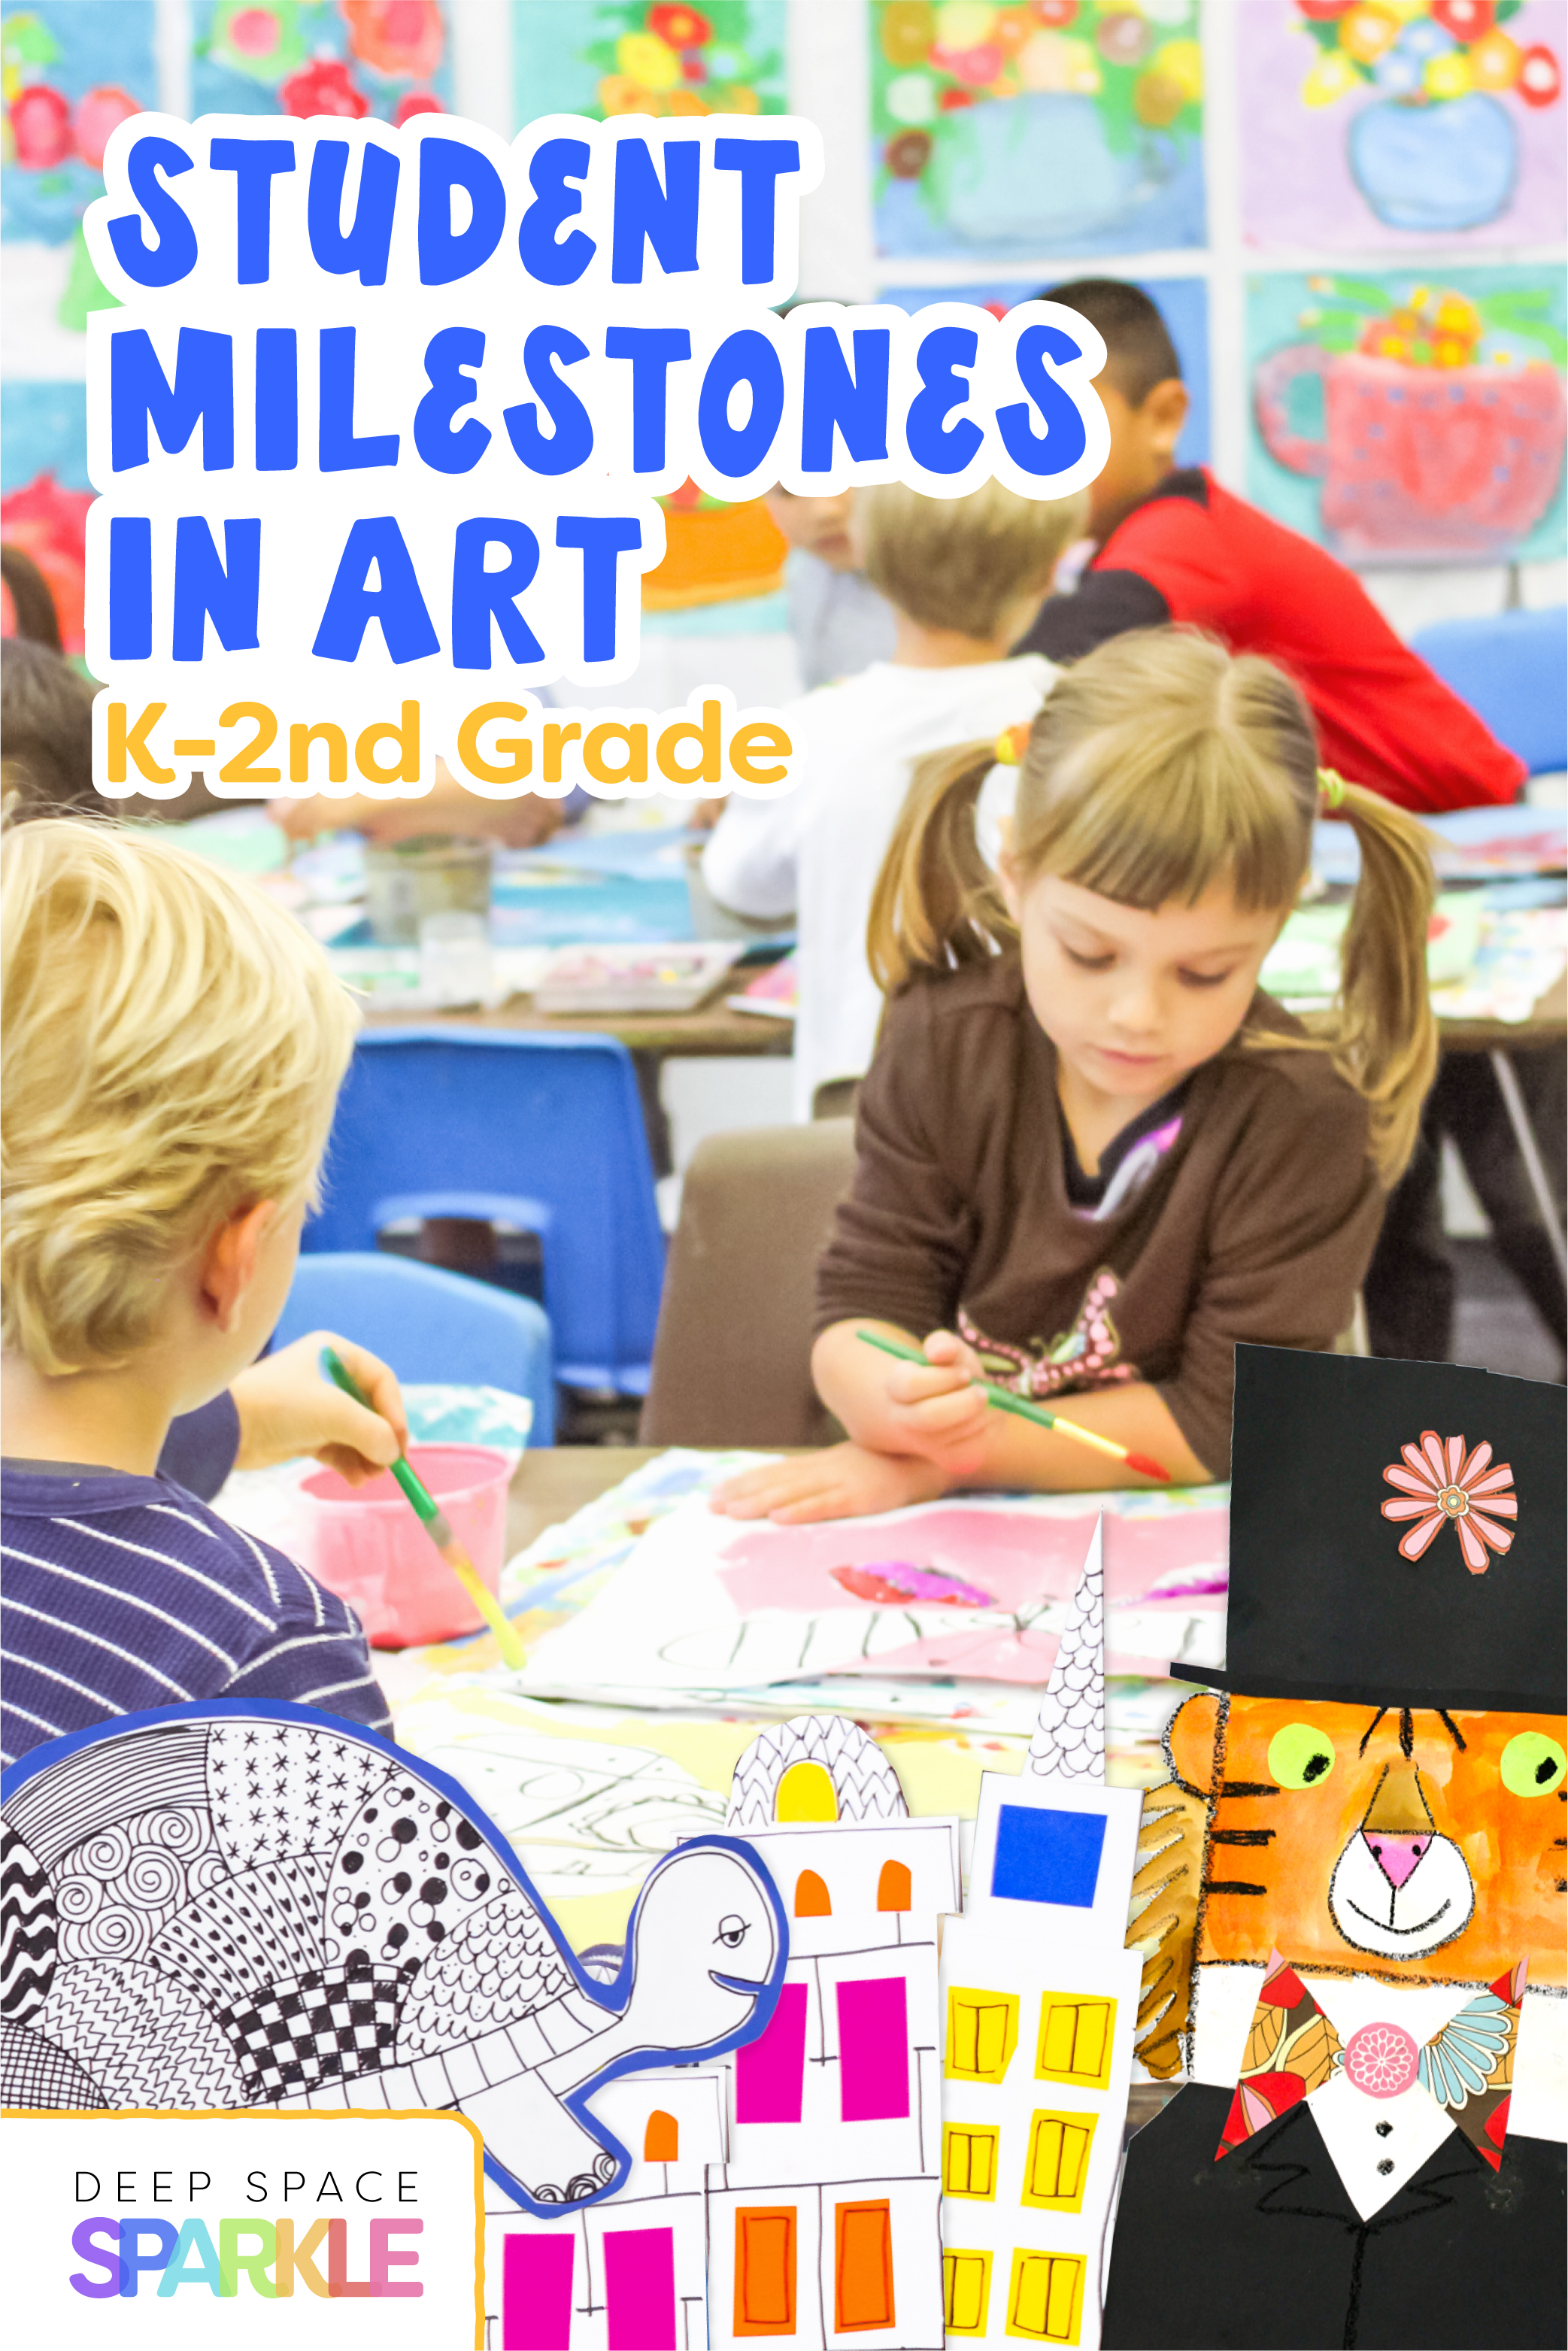 Student Milestones in Art for first, second and kindergarteners in the art room